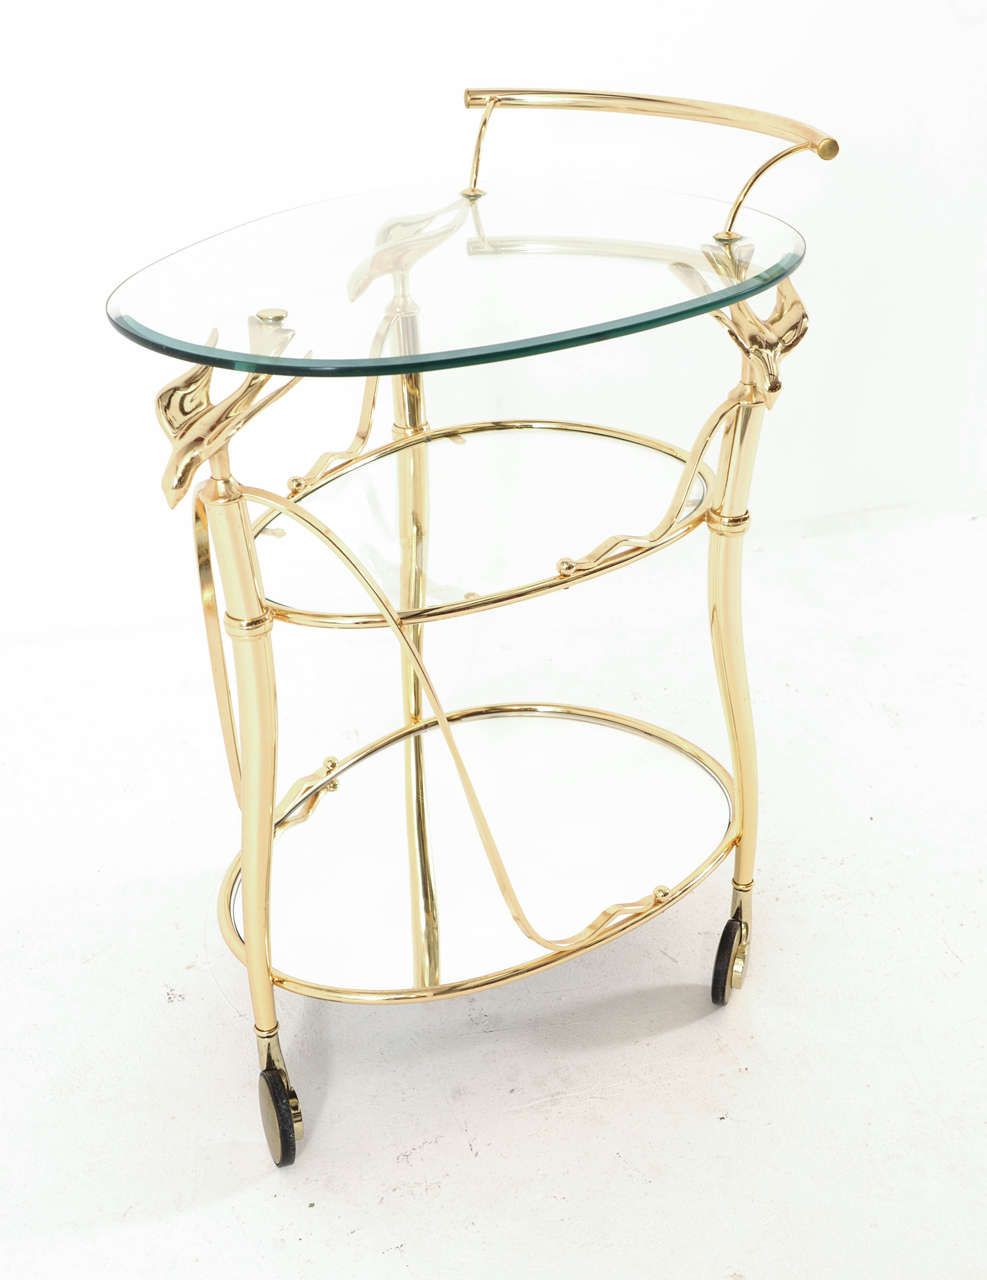 Gilded Bar Cart or Serving Trolley with Three Levels on Wheels 2